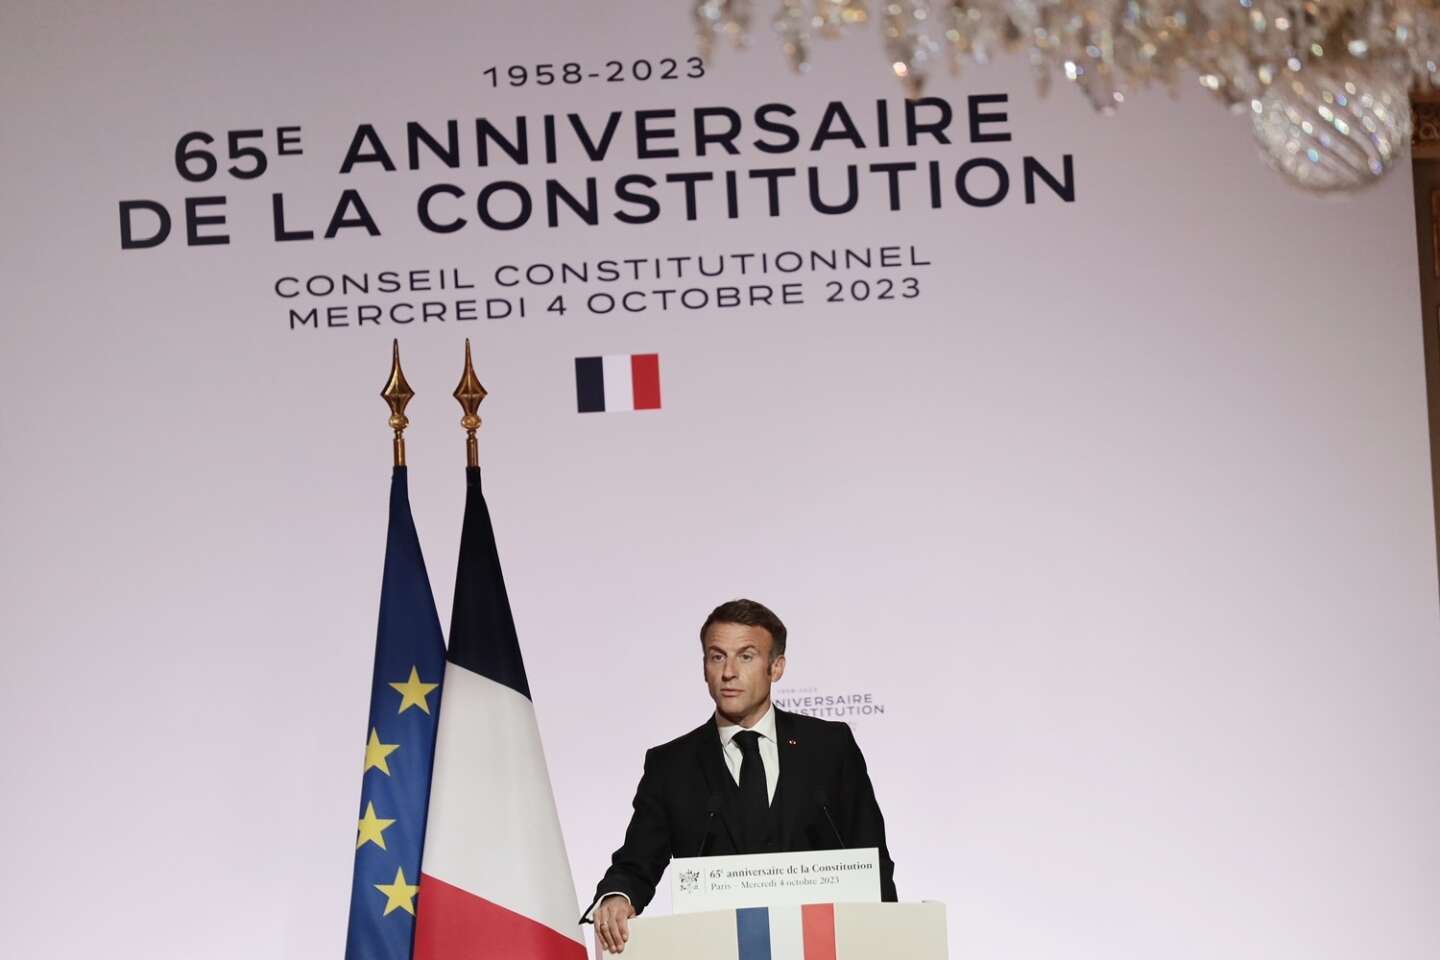 Emmanuel Macron proposes to revise the Constitution on the scope of the referendum and the use of the shared initiative referendum